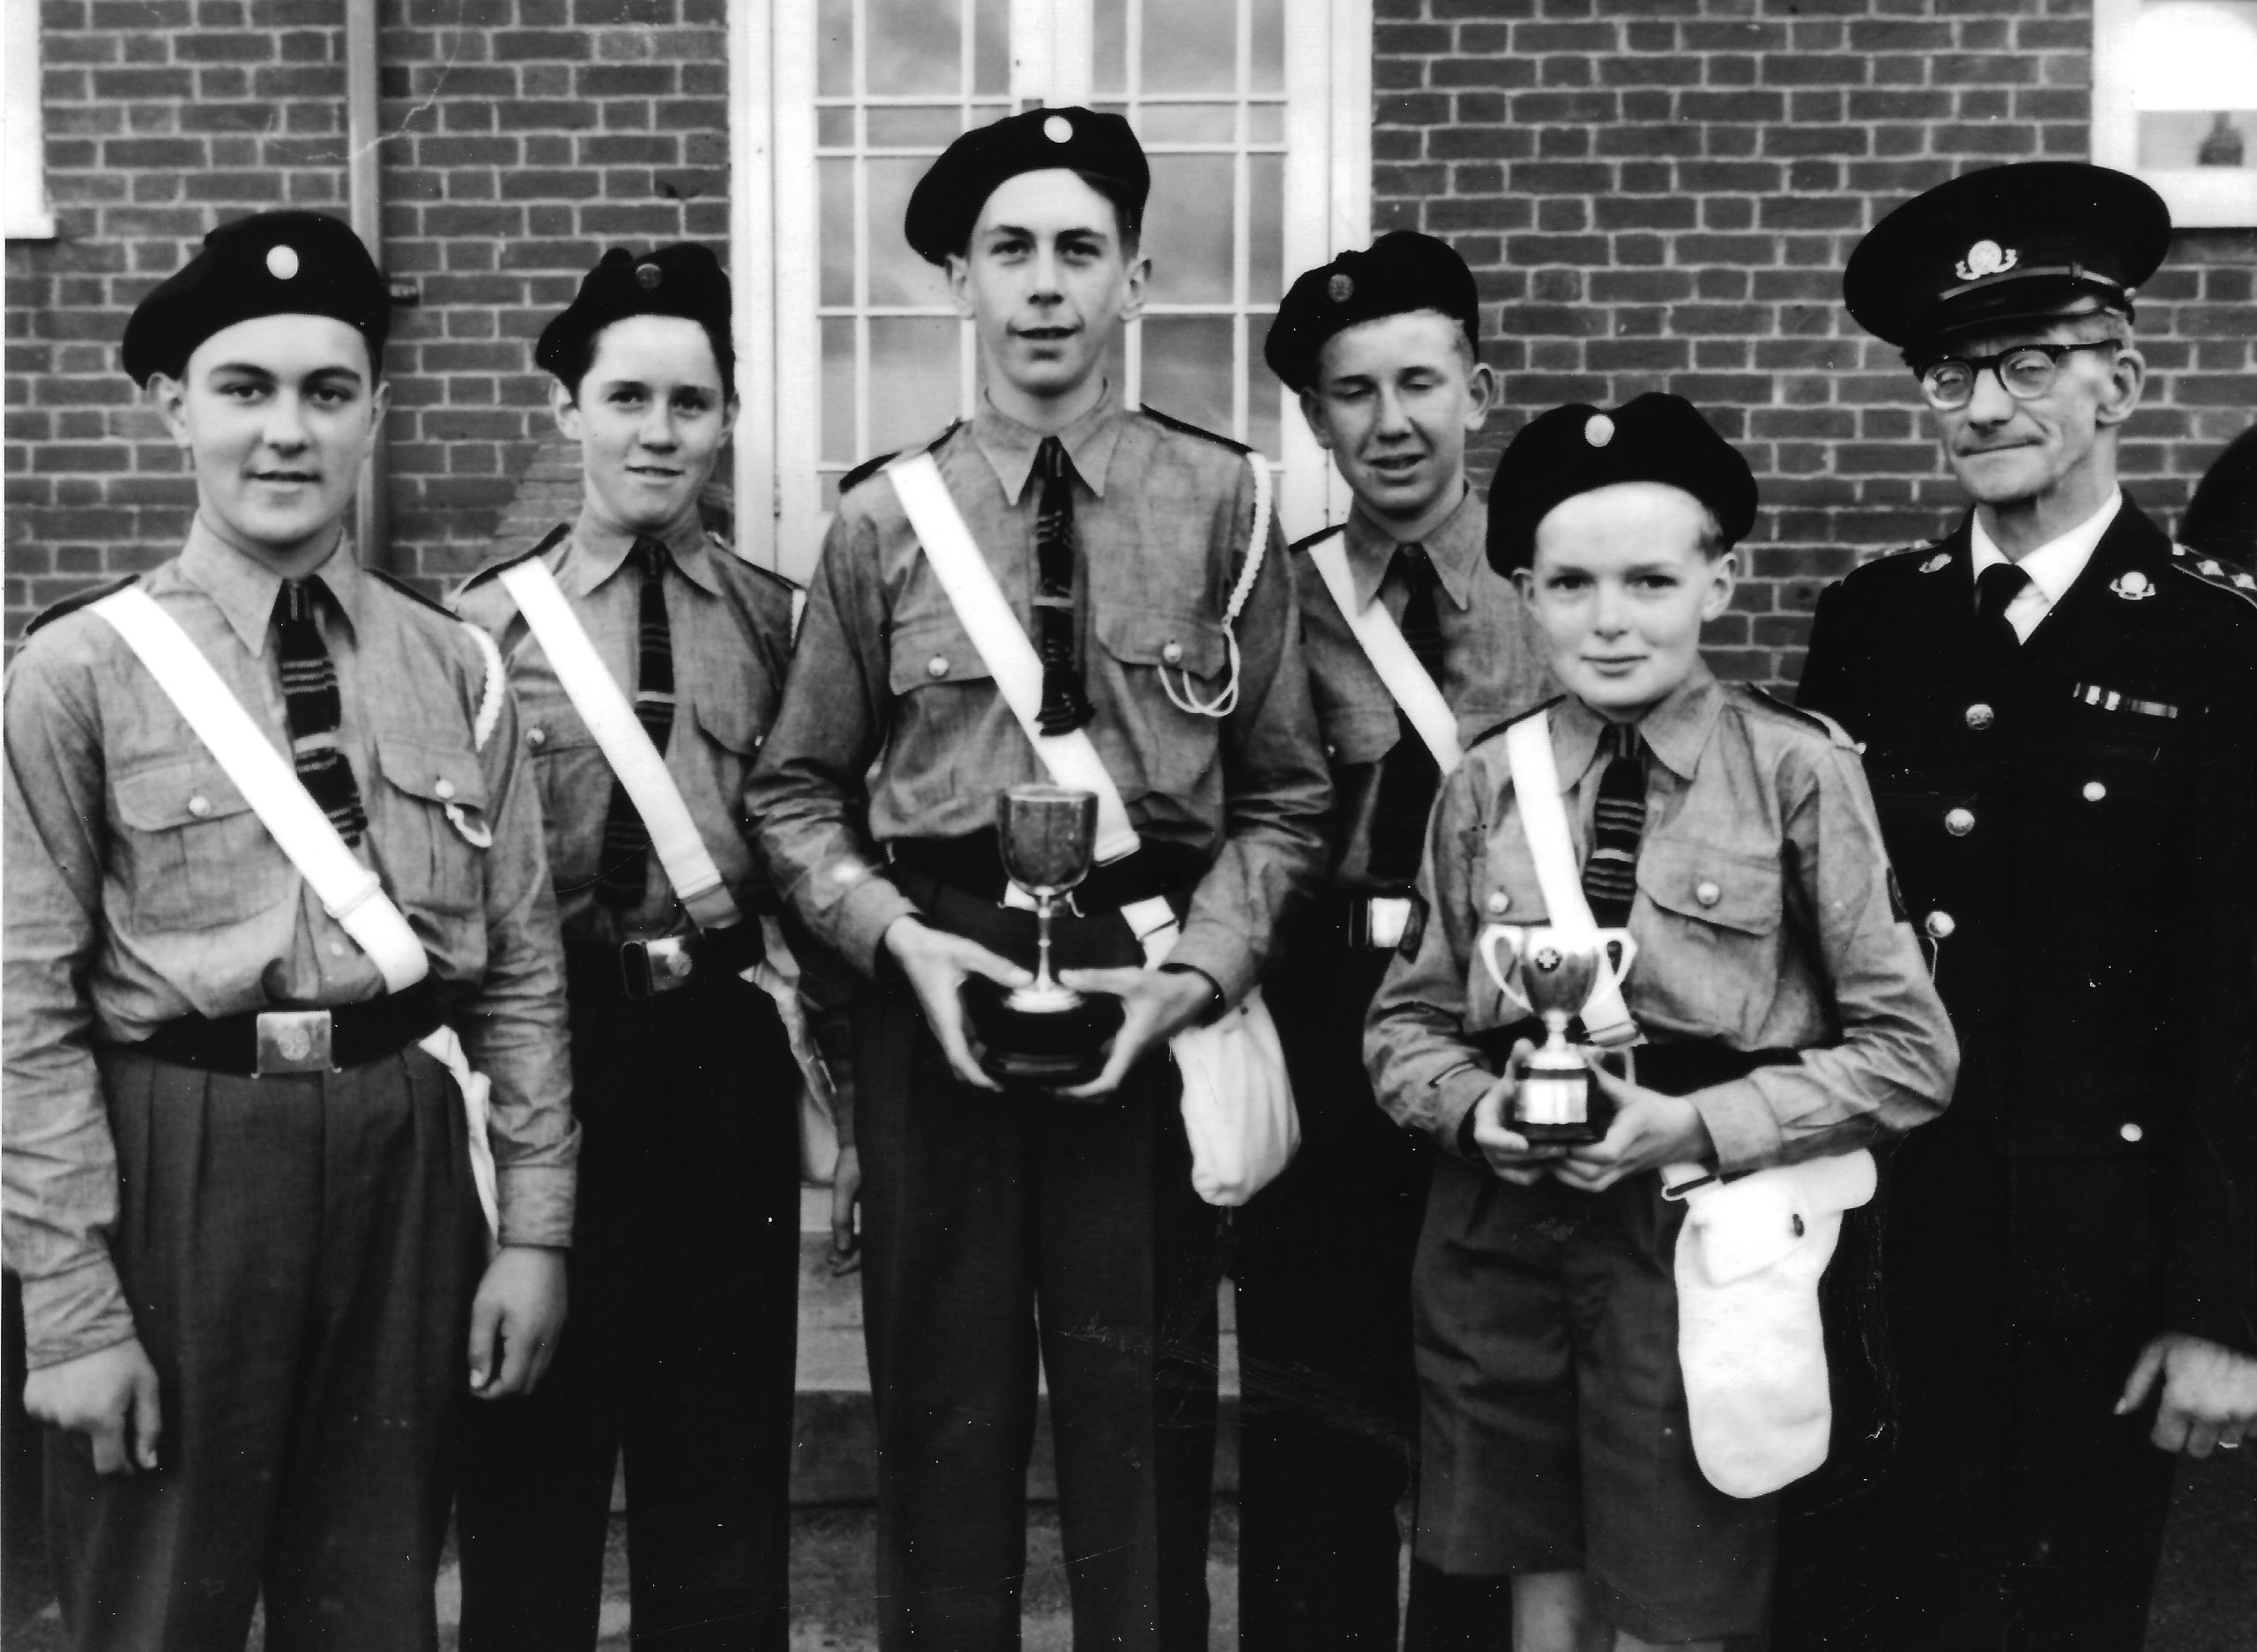 Black and white photograph of five male Cadets in uniform standing in a row. At the end of the row is an adult male in uniform. Two of the Cadets are holding trophies.